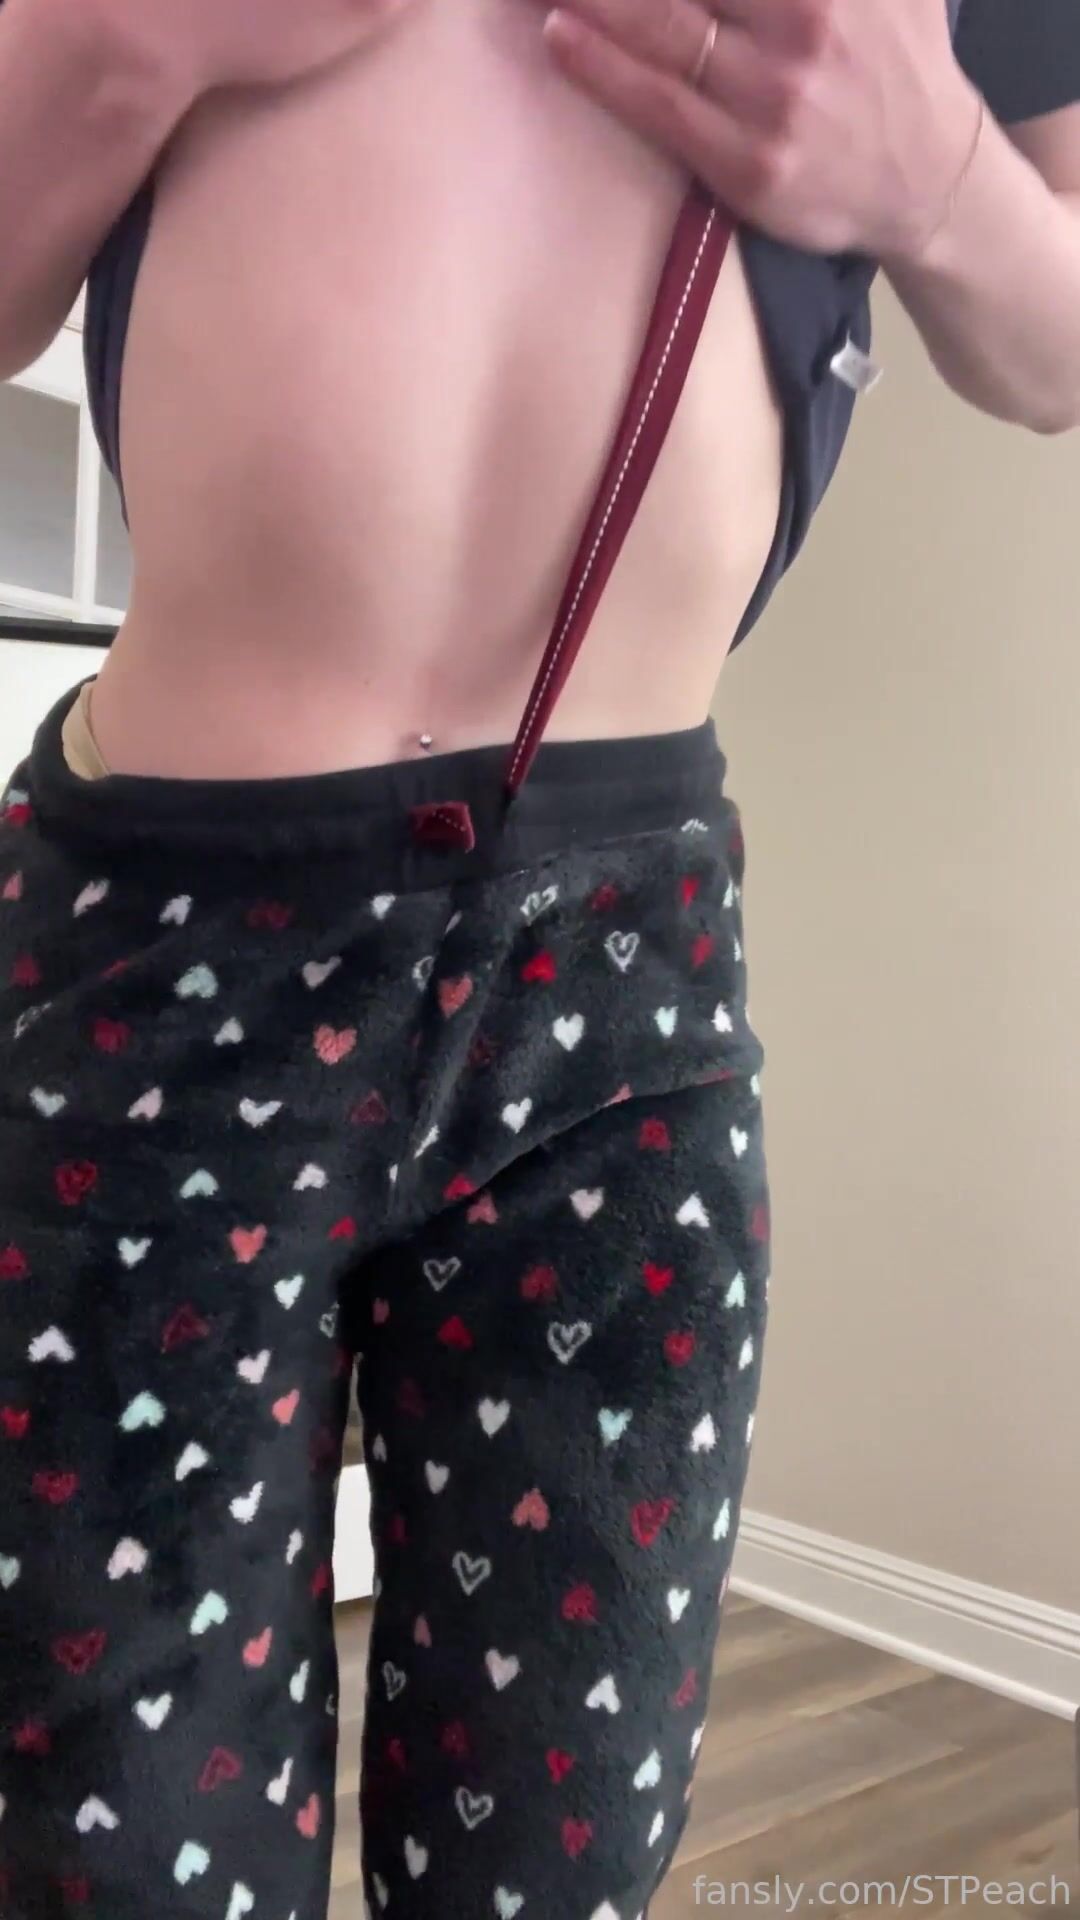 STpeach My ass is looking super juicy these days,